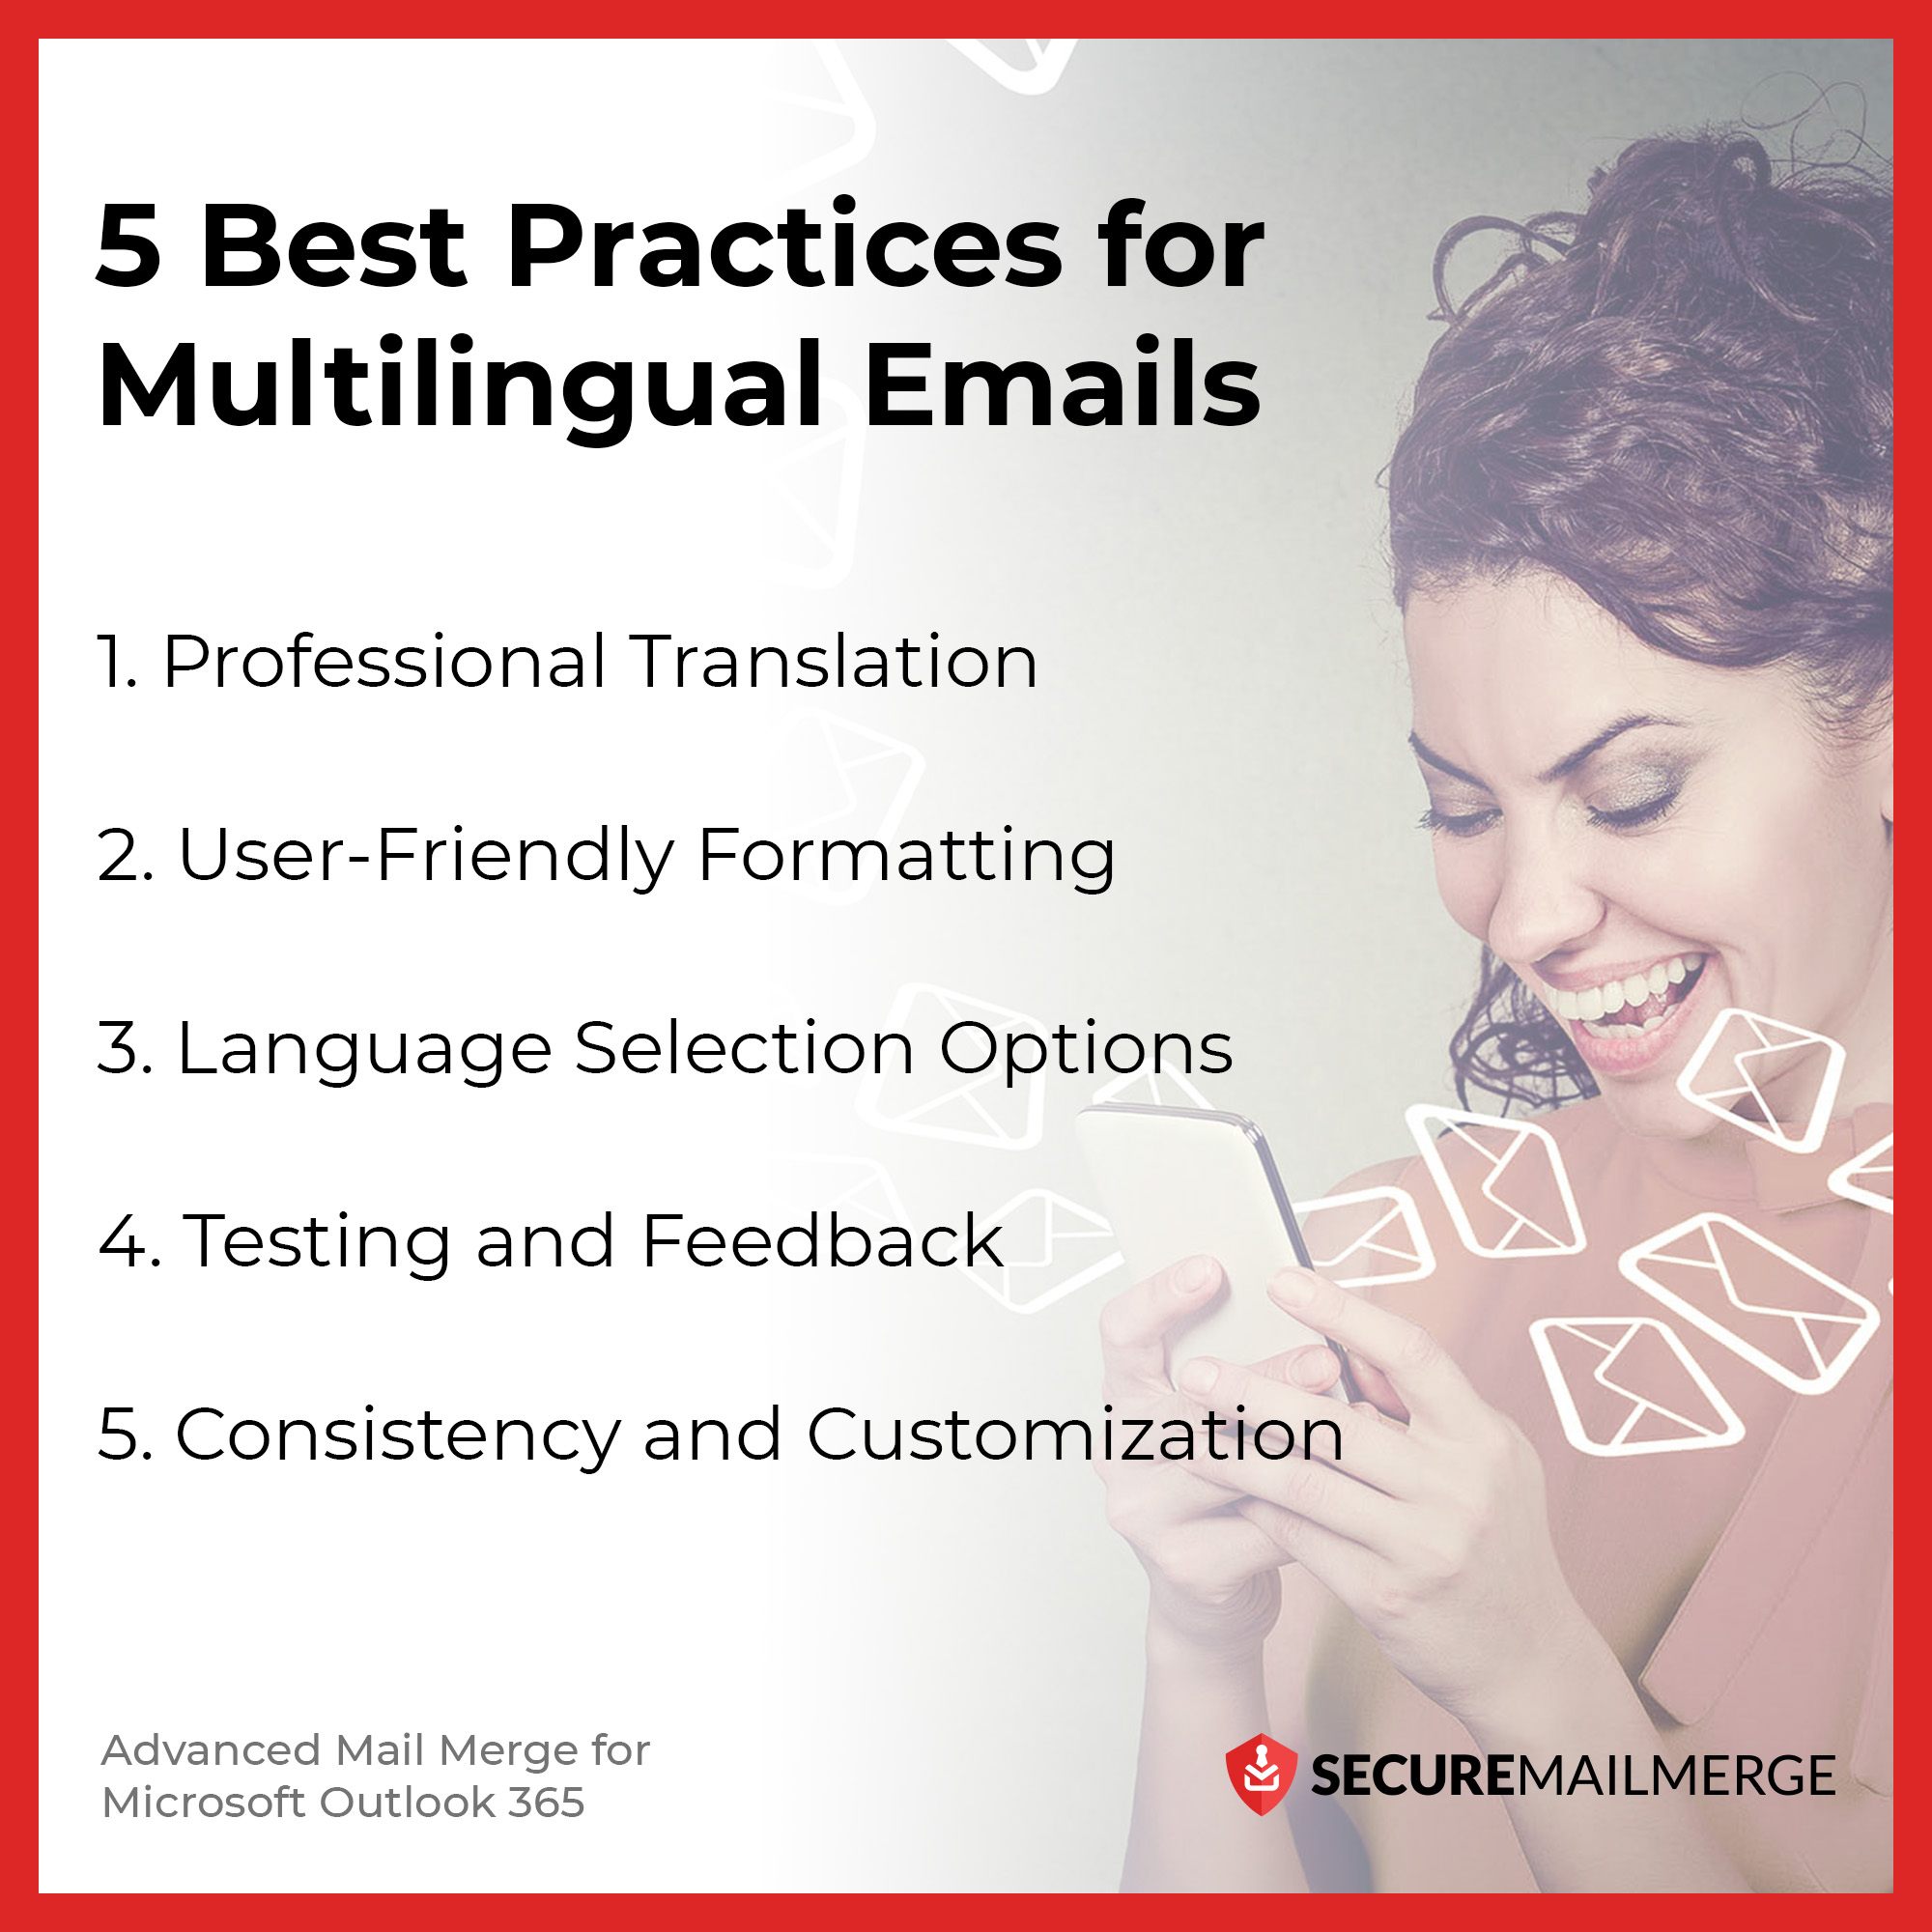 5 Best Practices for Multilingual Emails